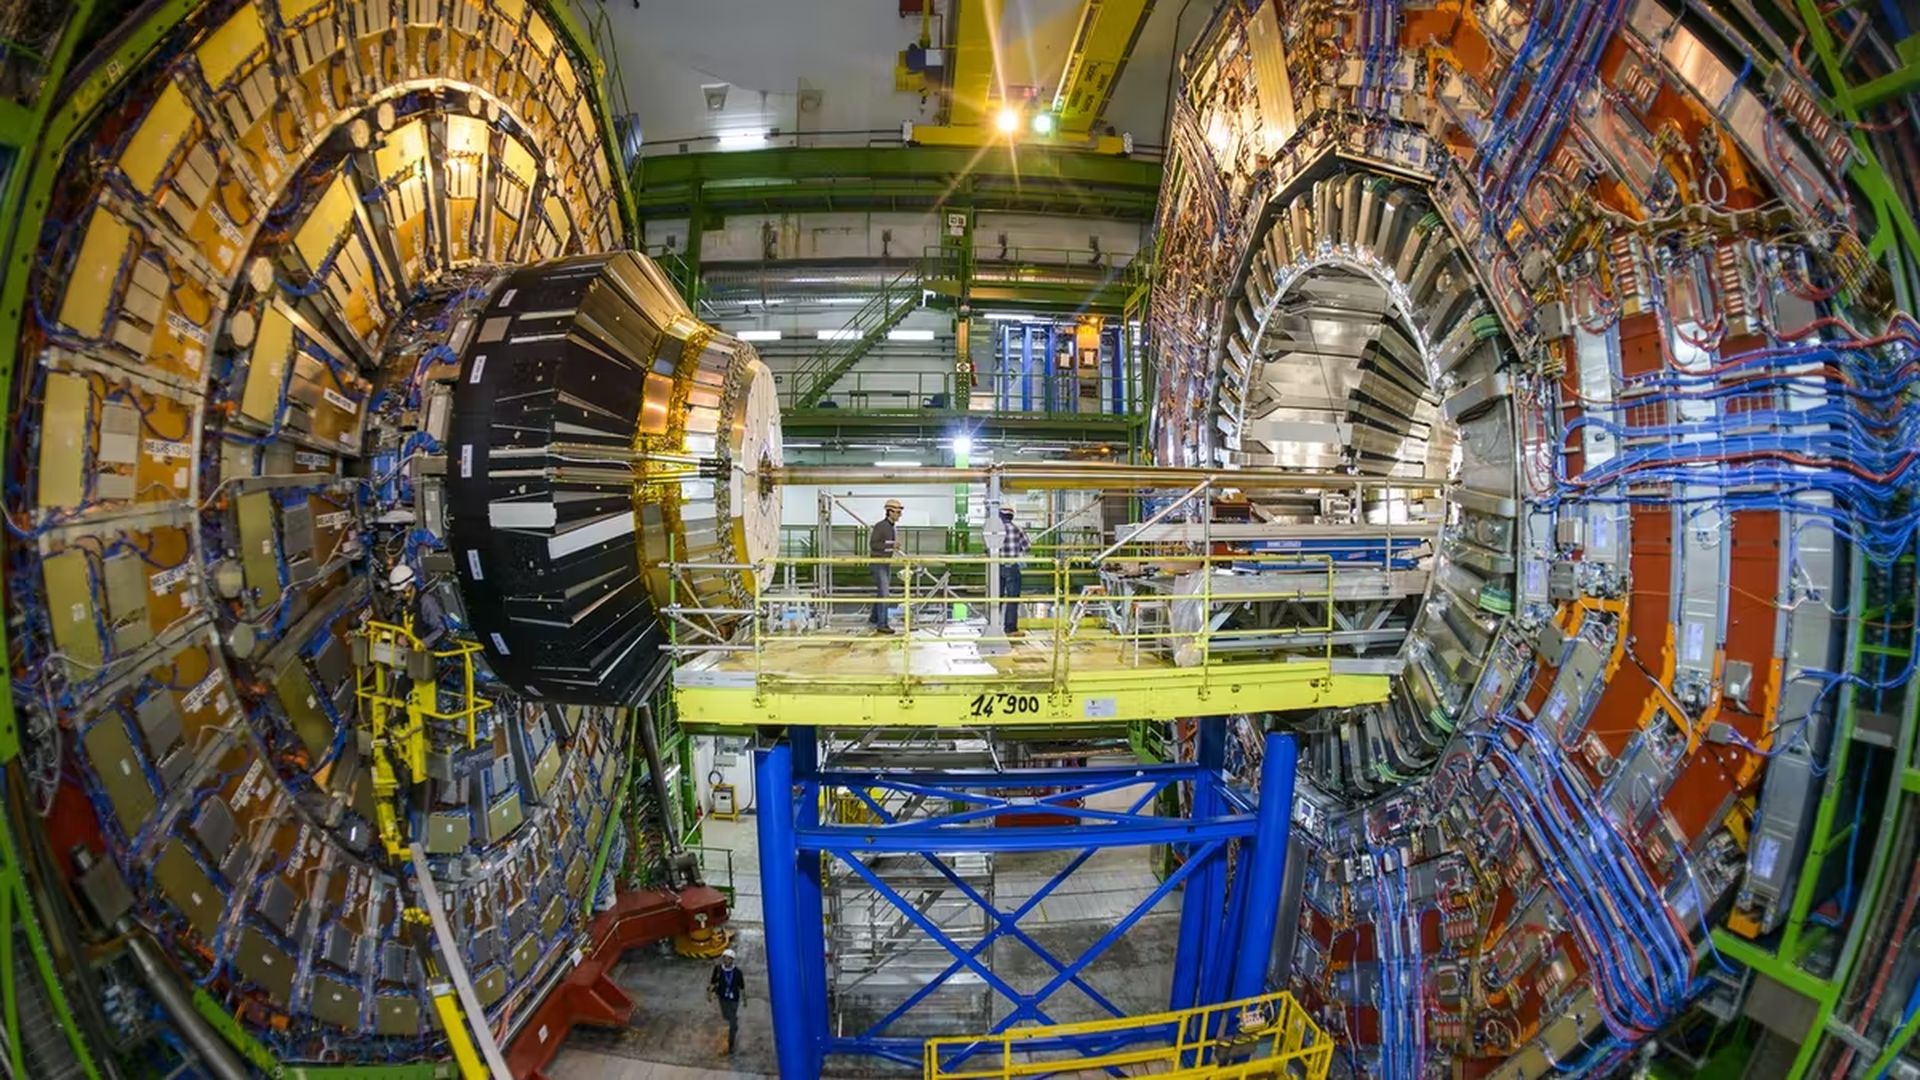 Elon Musk wants to use the CERN Large Hadron Collider 